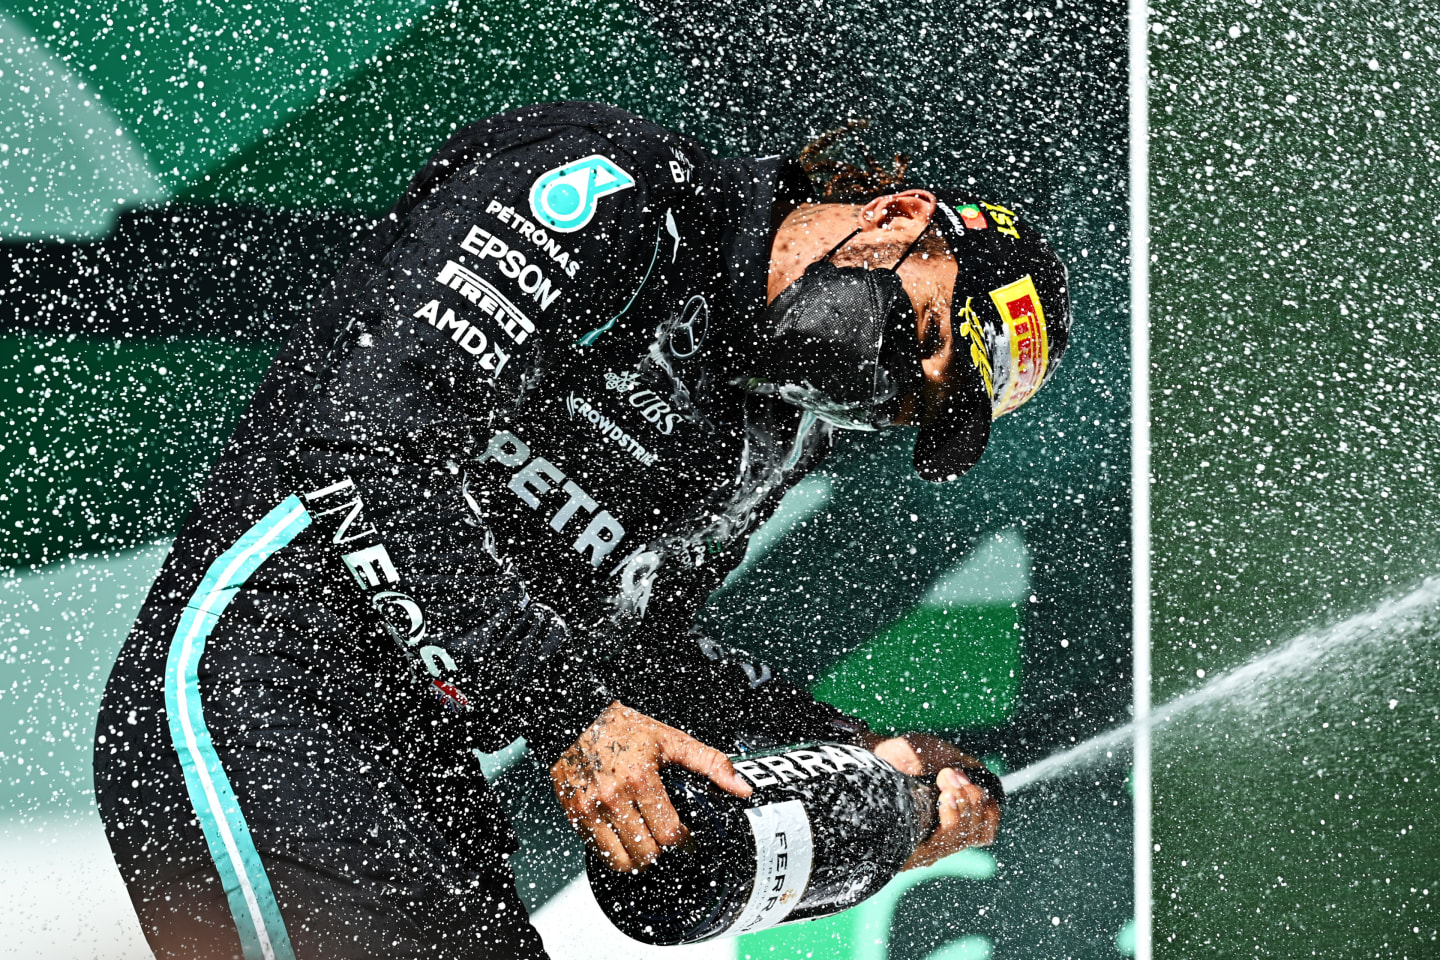 PORTIMAO, PORTUGAL - MAY 02: Race winner Lewis Hamilton of Great Britain and Mercedes GP celebrates with sparkling wine on the podium during the F1 Grand Prix of Portugal at Autodromo Internacional Do Algarve on May 02, 2021 in Portimao, Portugal. (Photo by Clive Mason - Formula 1/Formula 1 via Getty Images)